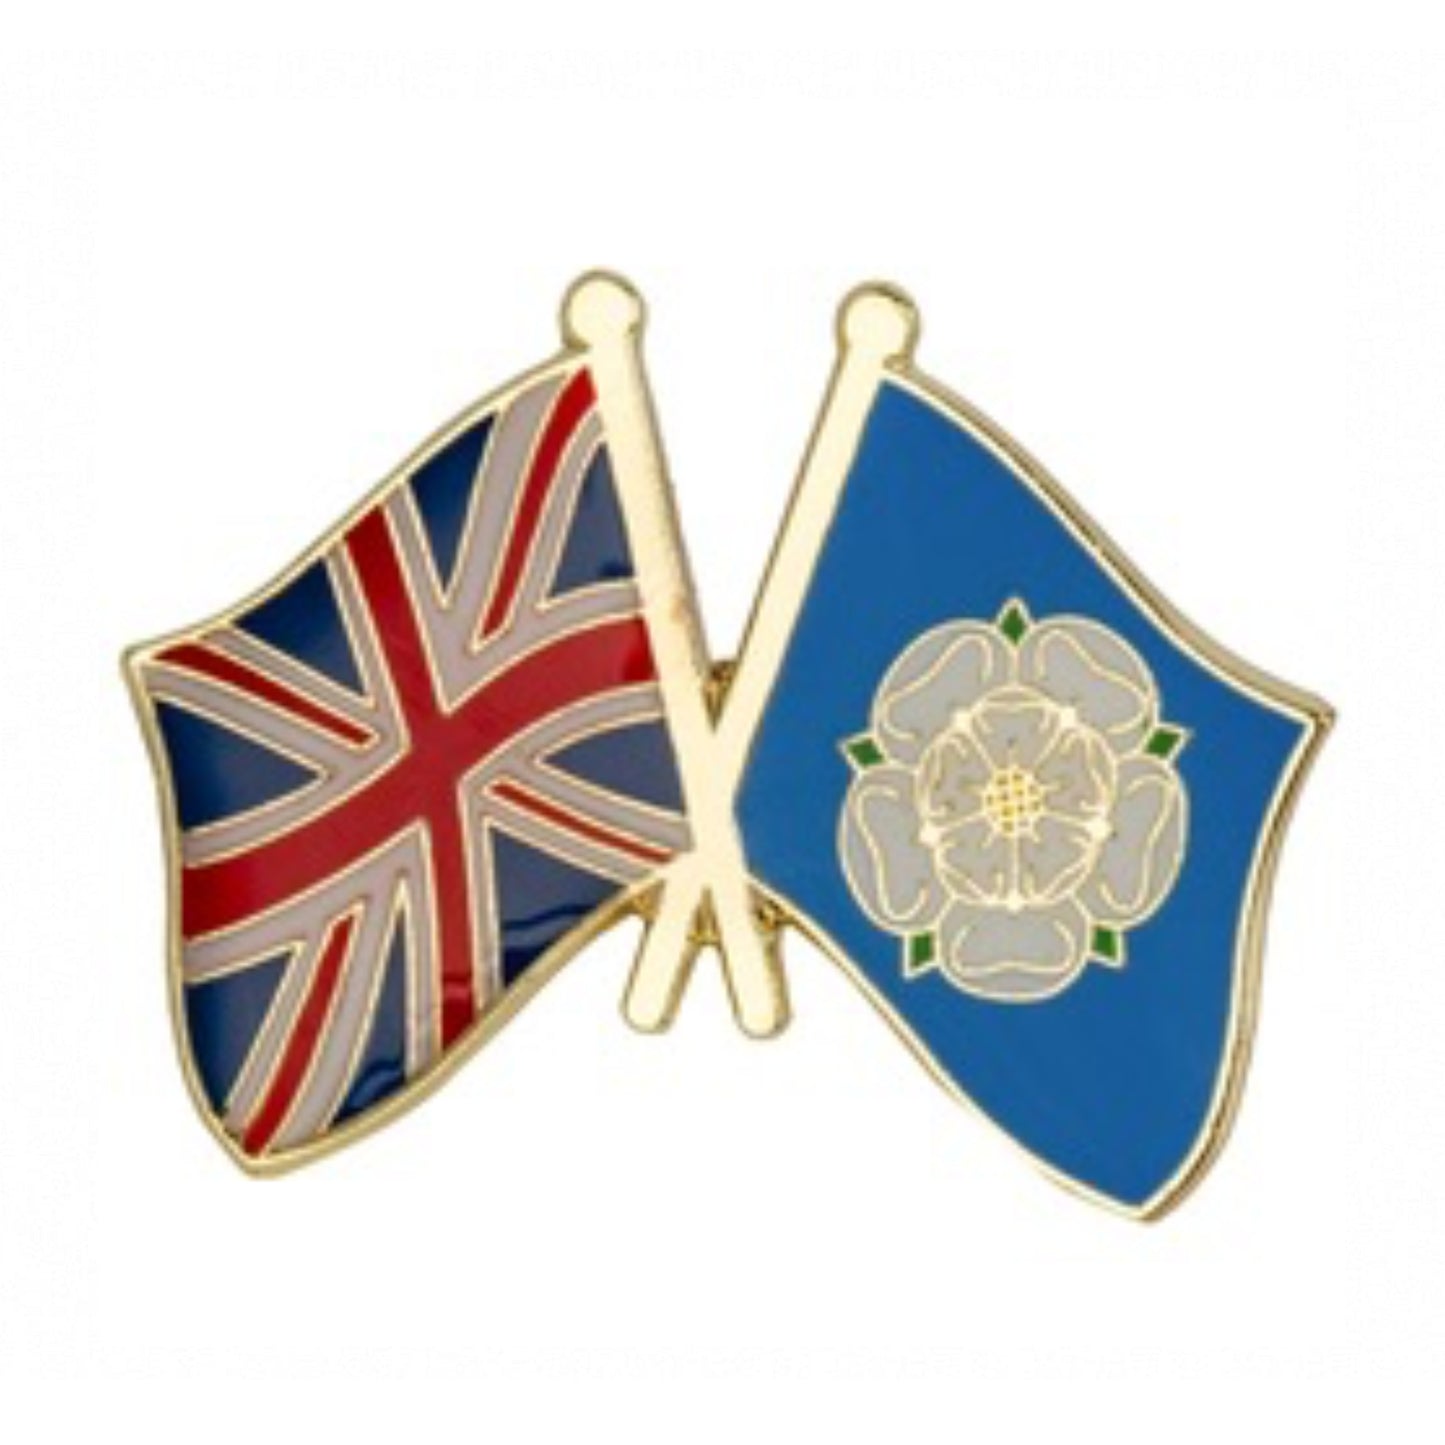 Yorkshire & Union Jack Flag Pin Badge - The Great Yorkshire Shop